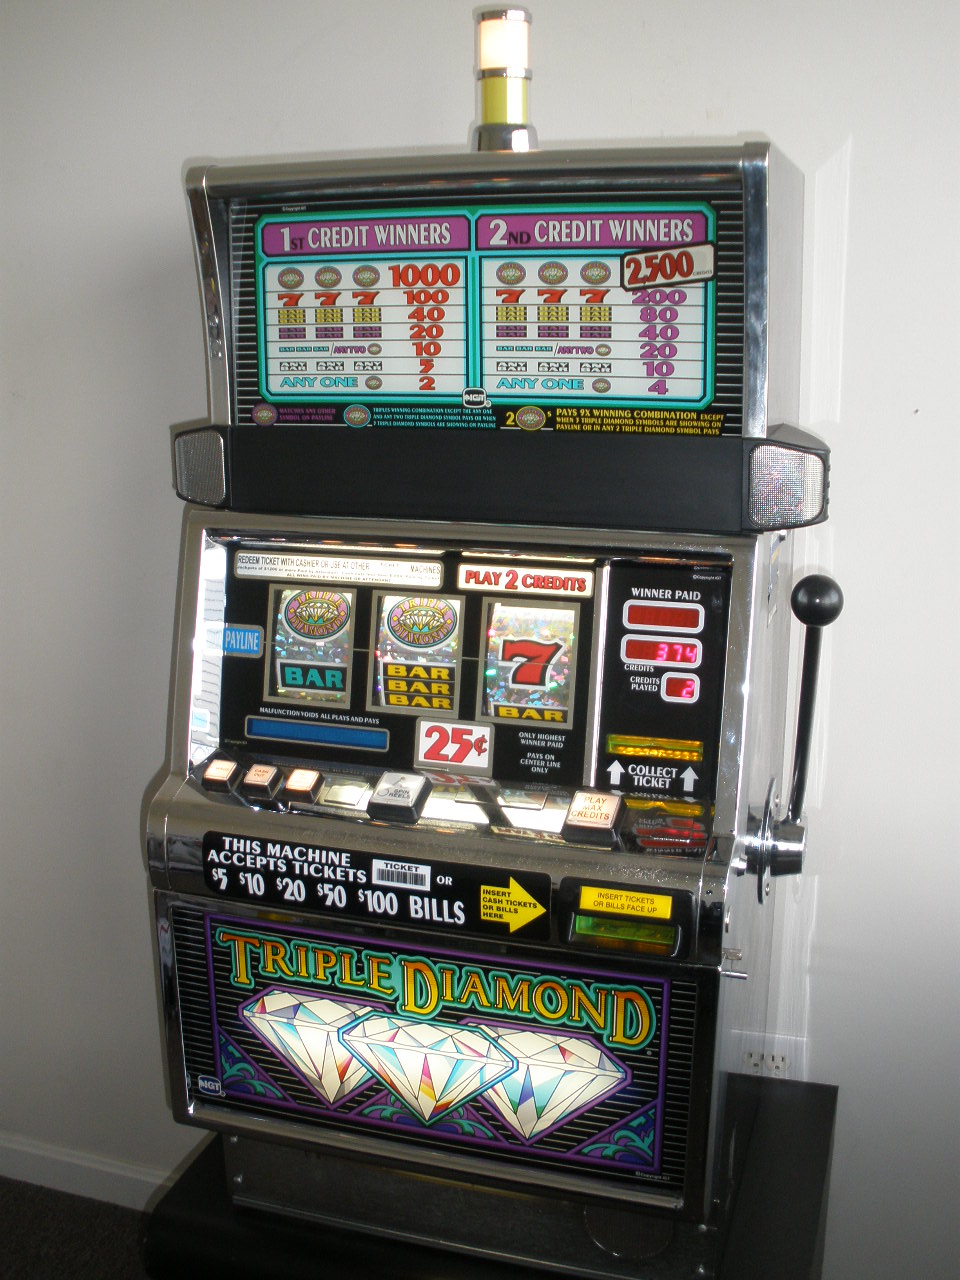 https://www.gamblersoasisusa.com/resize/Shared/Images/Product/IGT-TRIPLE-DIAMOND-FLAT-TOP-S2000-SLOT-MACHINE/P4072068.jpg?bw=1000&bh=1000